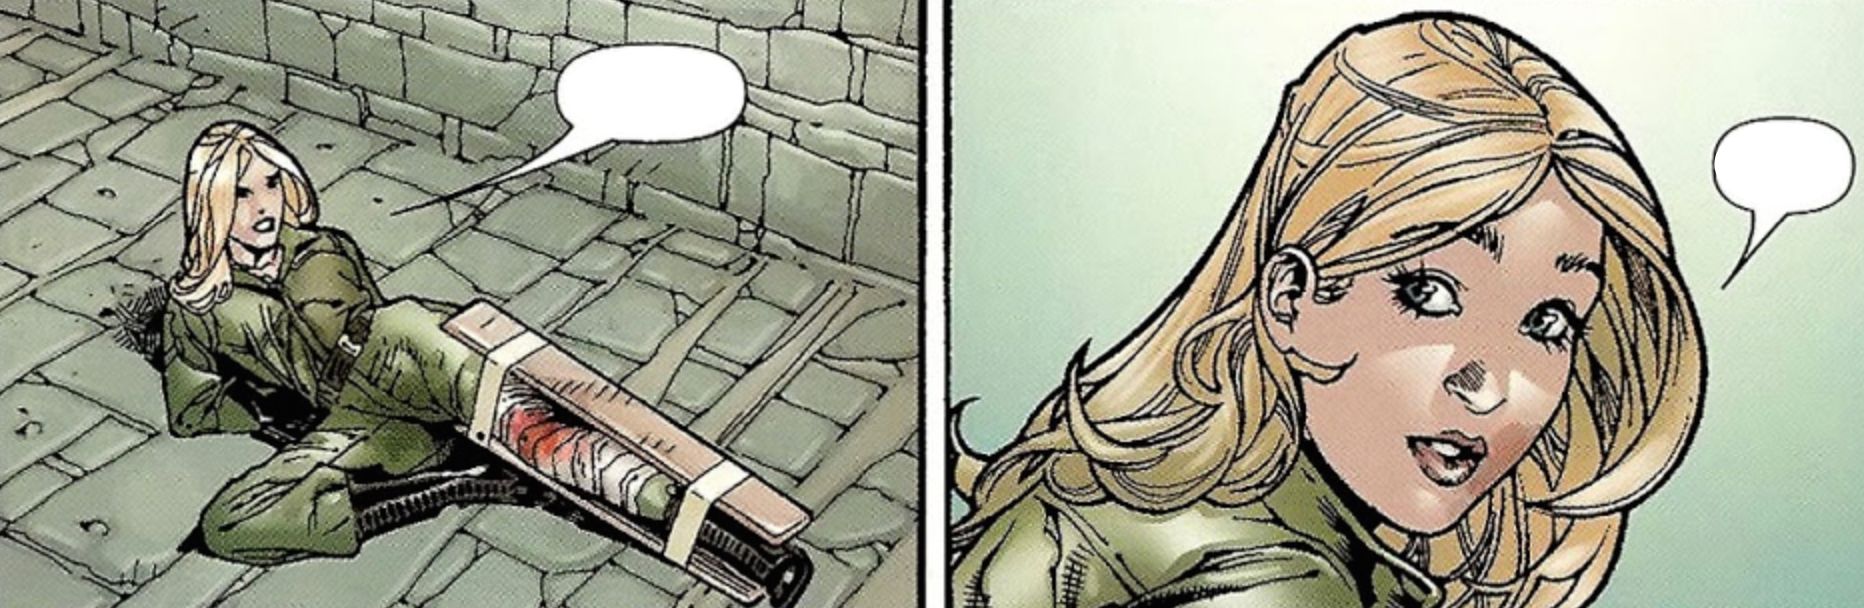 Carol Danvers Escapes A Kidnapping With A Broken Leg